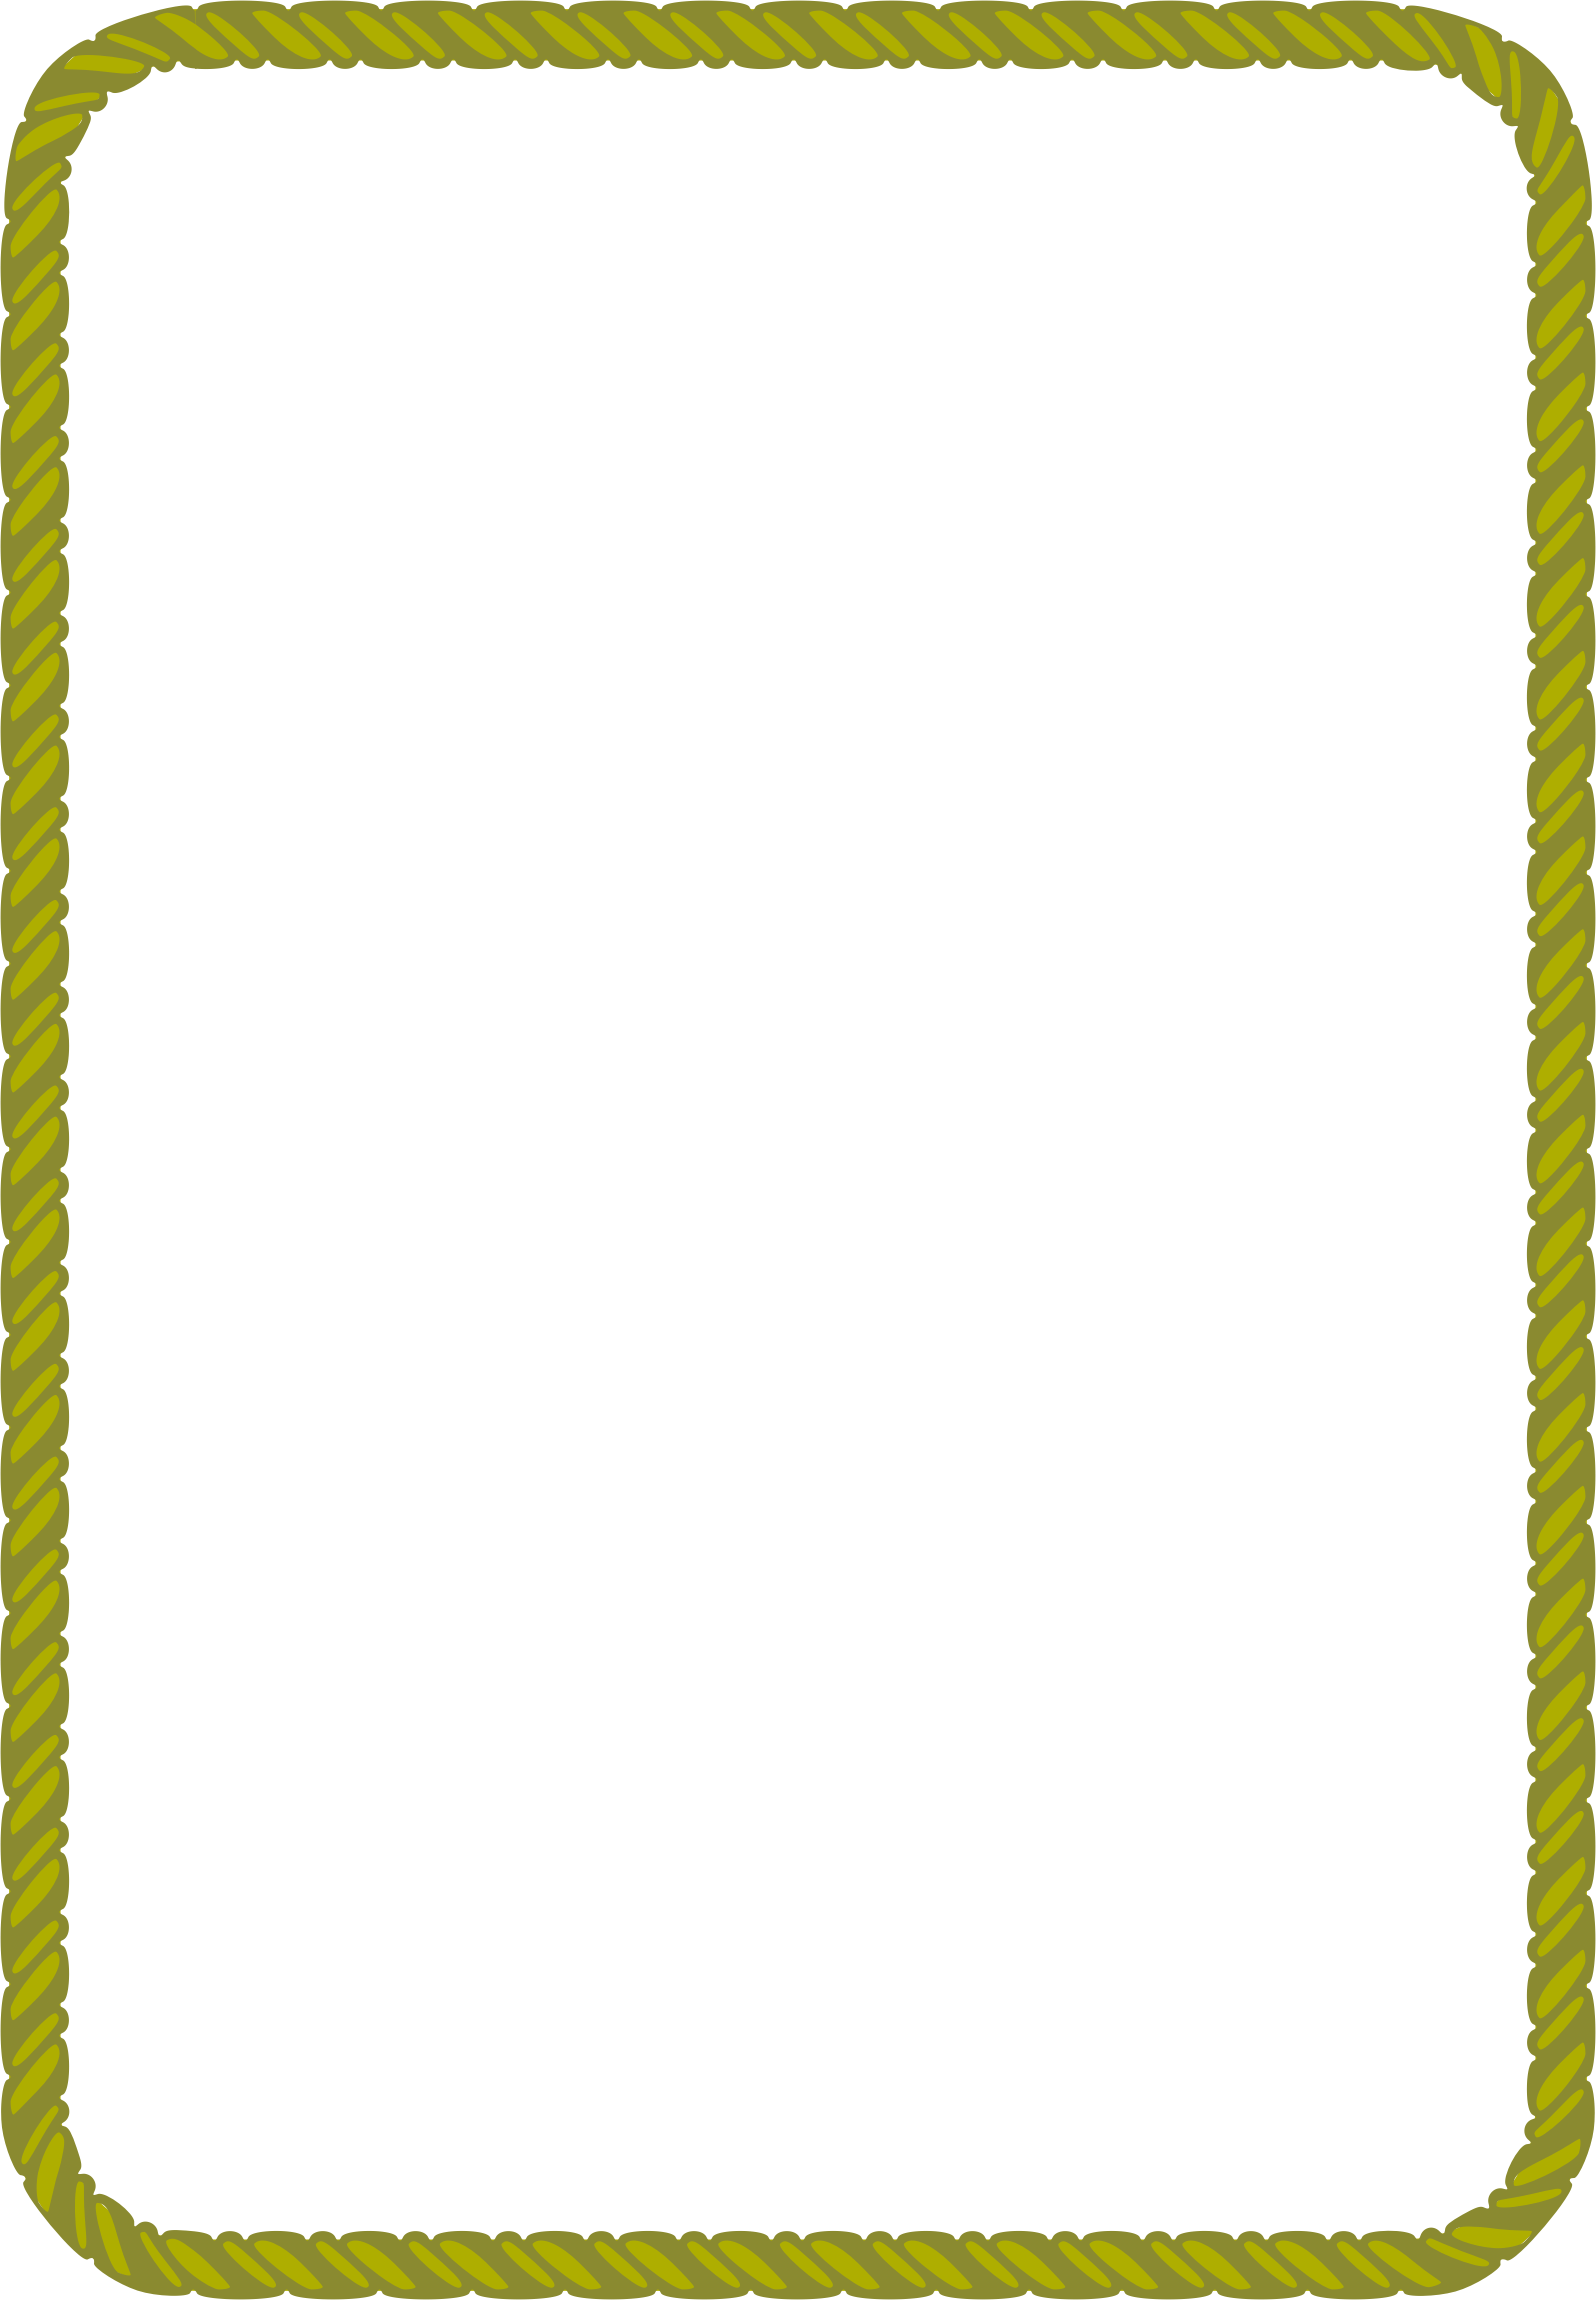 By Arvin61r58 - Honeycomb Border (1596x2300)